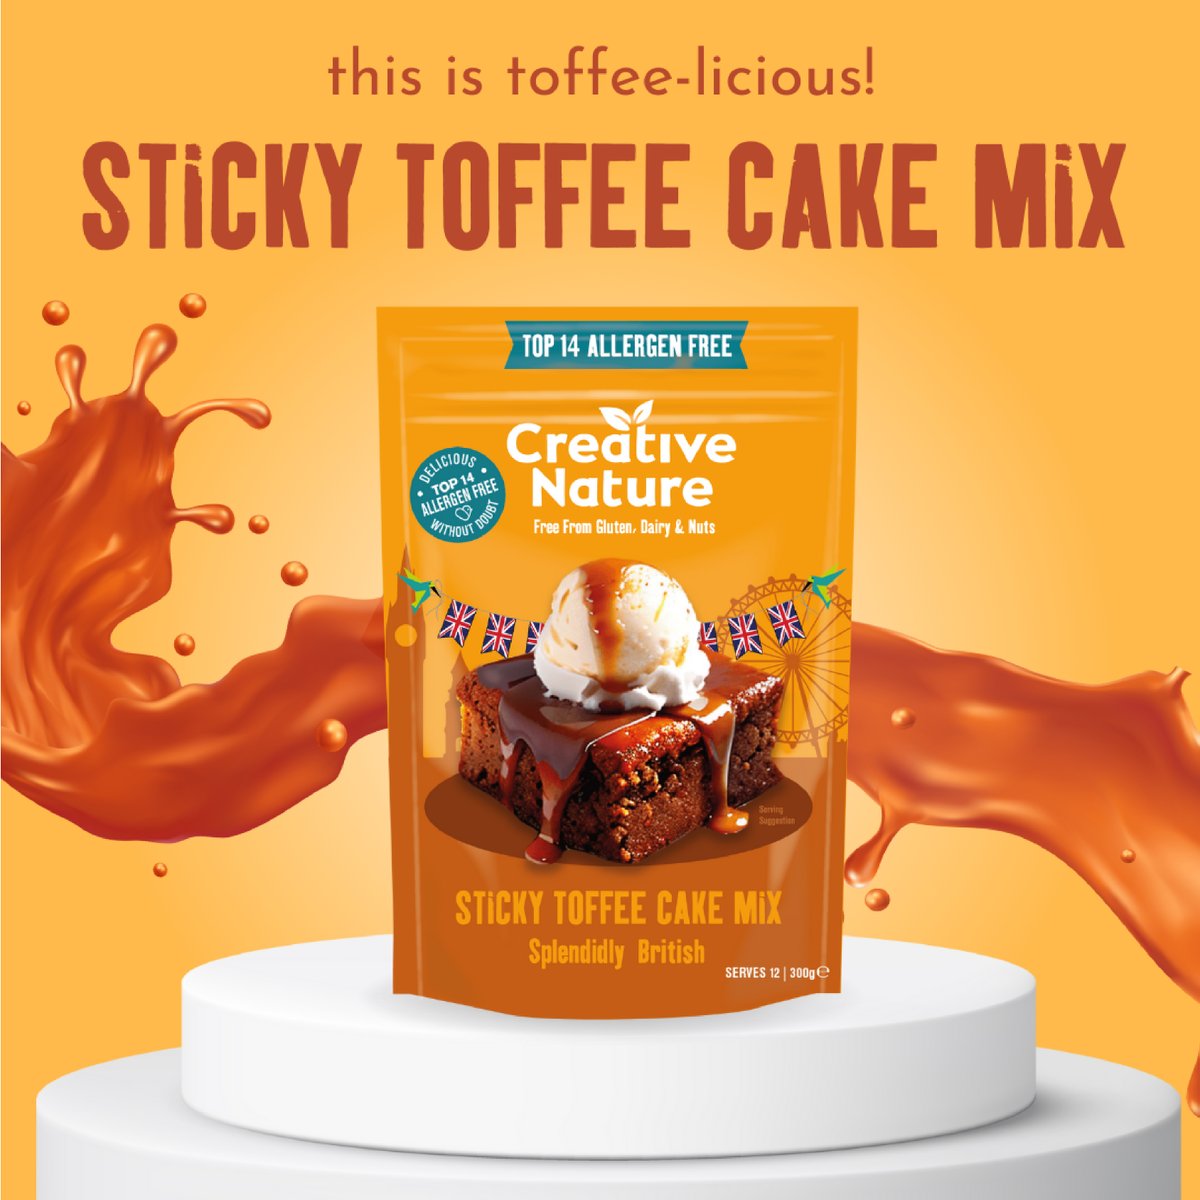 THE DAY HAS COME!! We have launched a brand new top 14 allergen free baking mix to our range... Introducing our Sticky Toffee Cake Mix! We are so excited for you all to know get your hands on this mix. Buy it now from Ocado or our website! #new #launch #baking #allergies